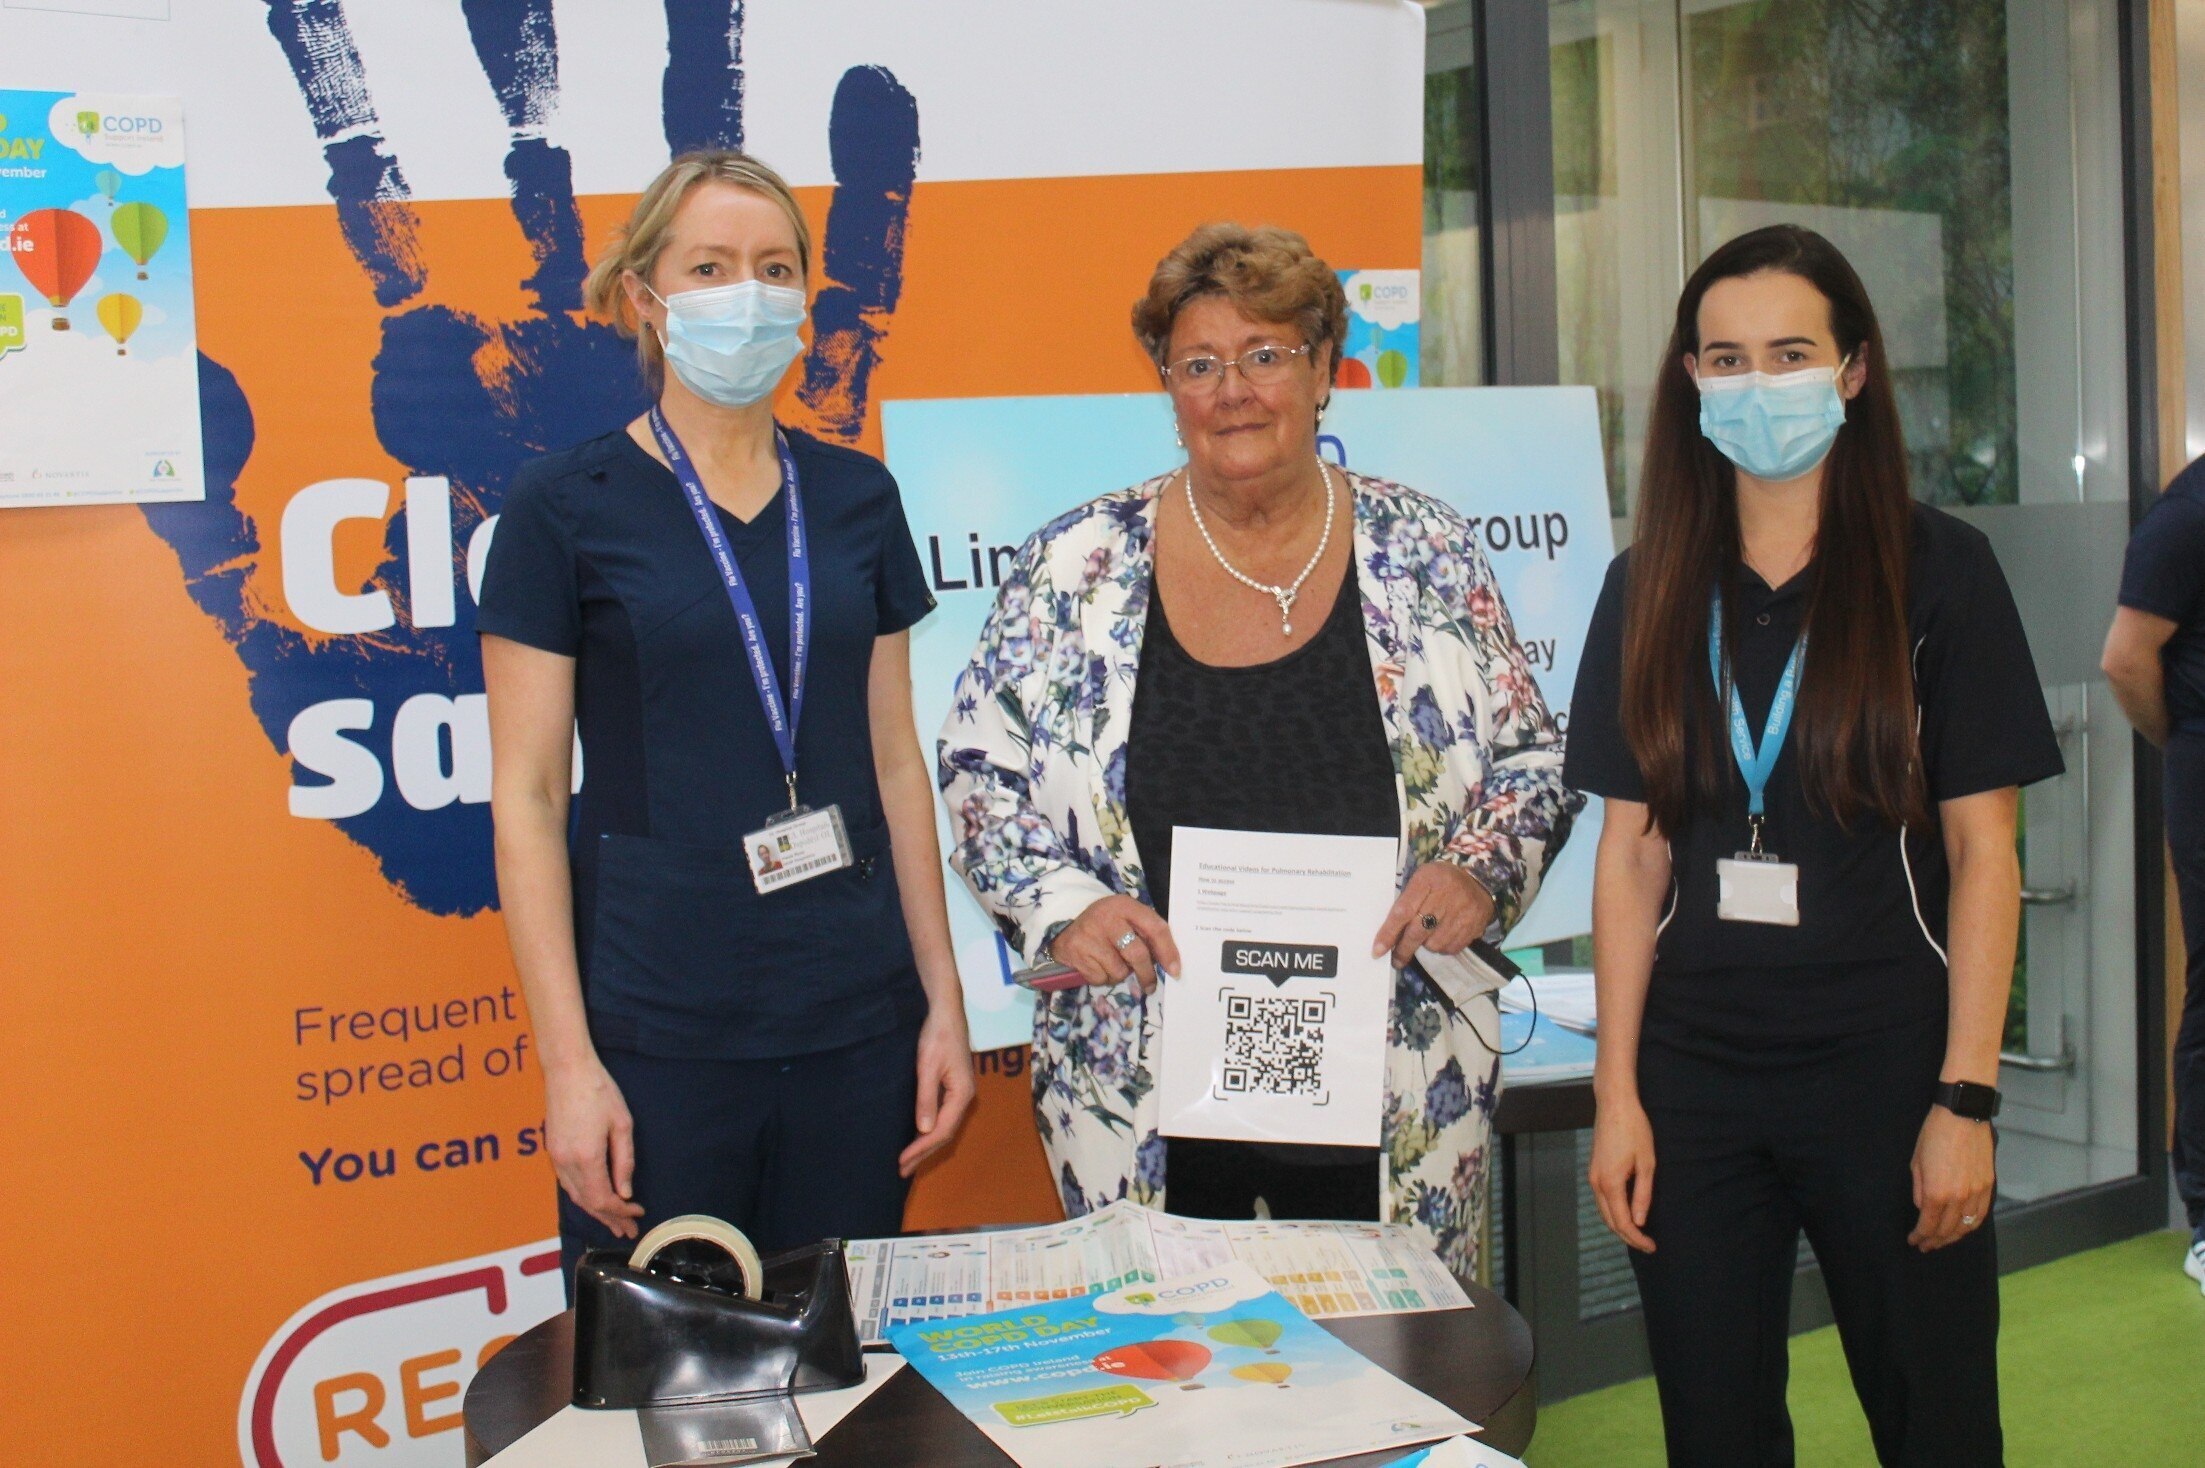 World COPD Day 2021 - Marking World COPD Day at UHL this week were Paula Ryan, Advanced Nurse Practitioner, Respiratory, UHL; Carmel McCarthy, Limerick COPD Support Group, and Maire Curran, Senior Respiratory Physiotherapist, HSE MidWest Community Healthcare